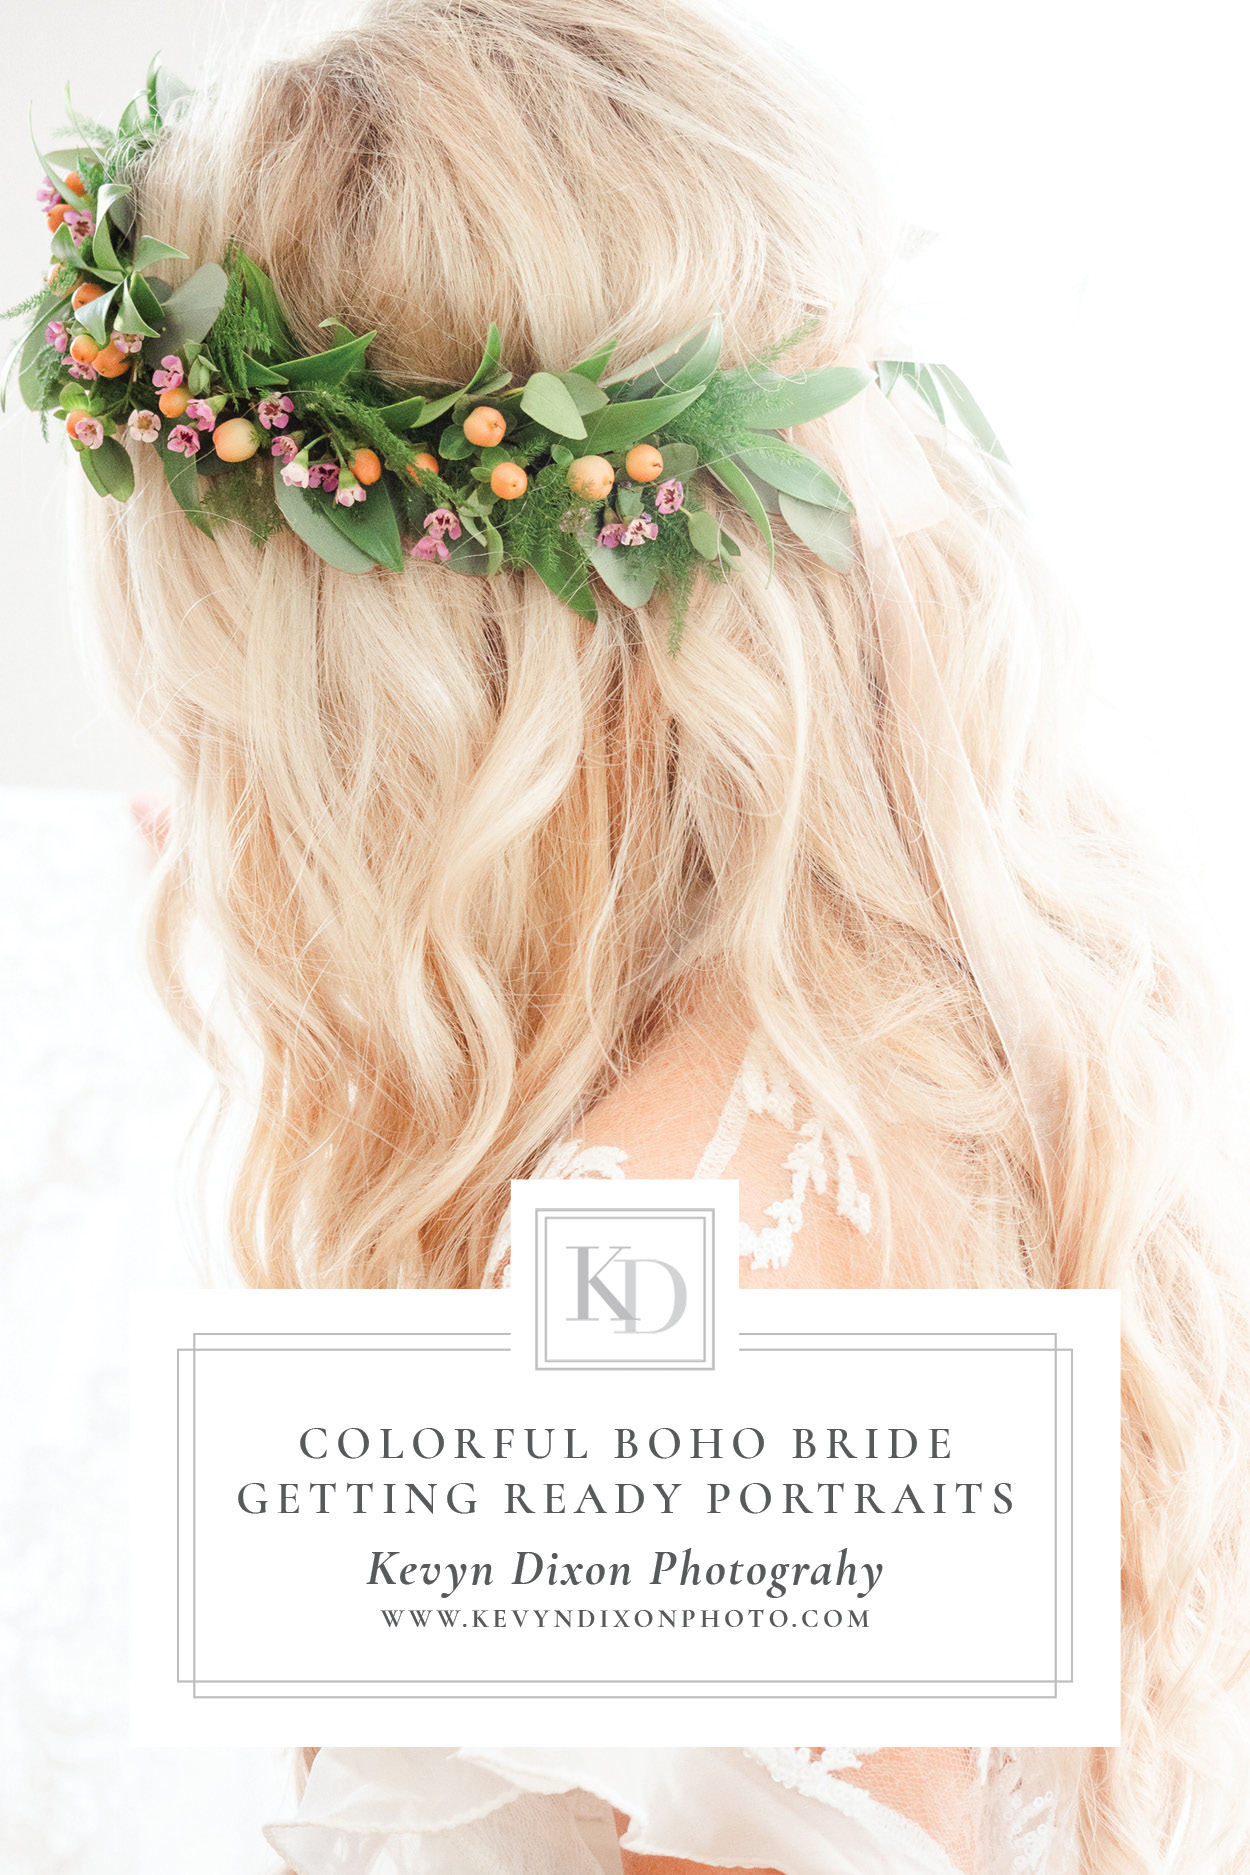 Colorful Boho Bride Getting Ready Portraits Pin Image